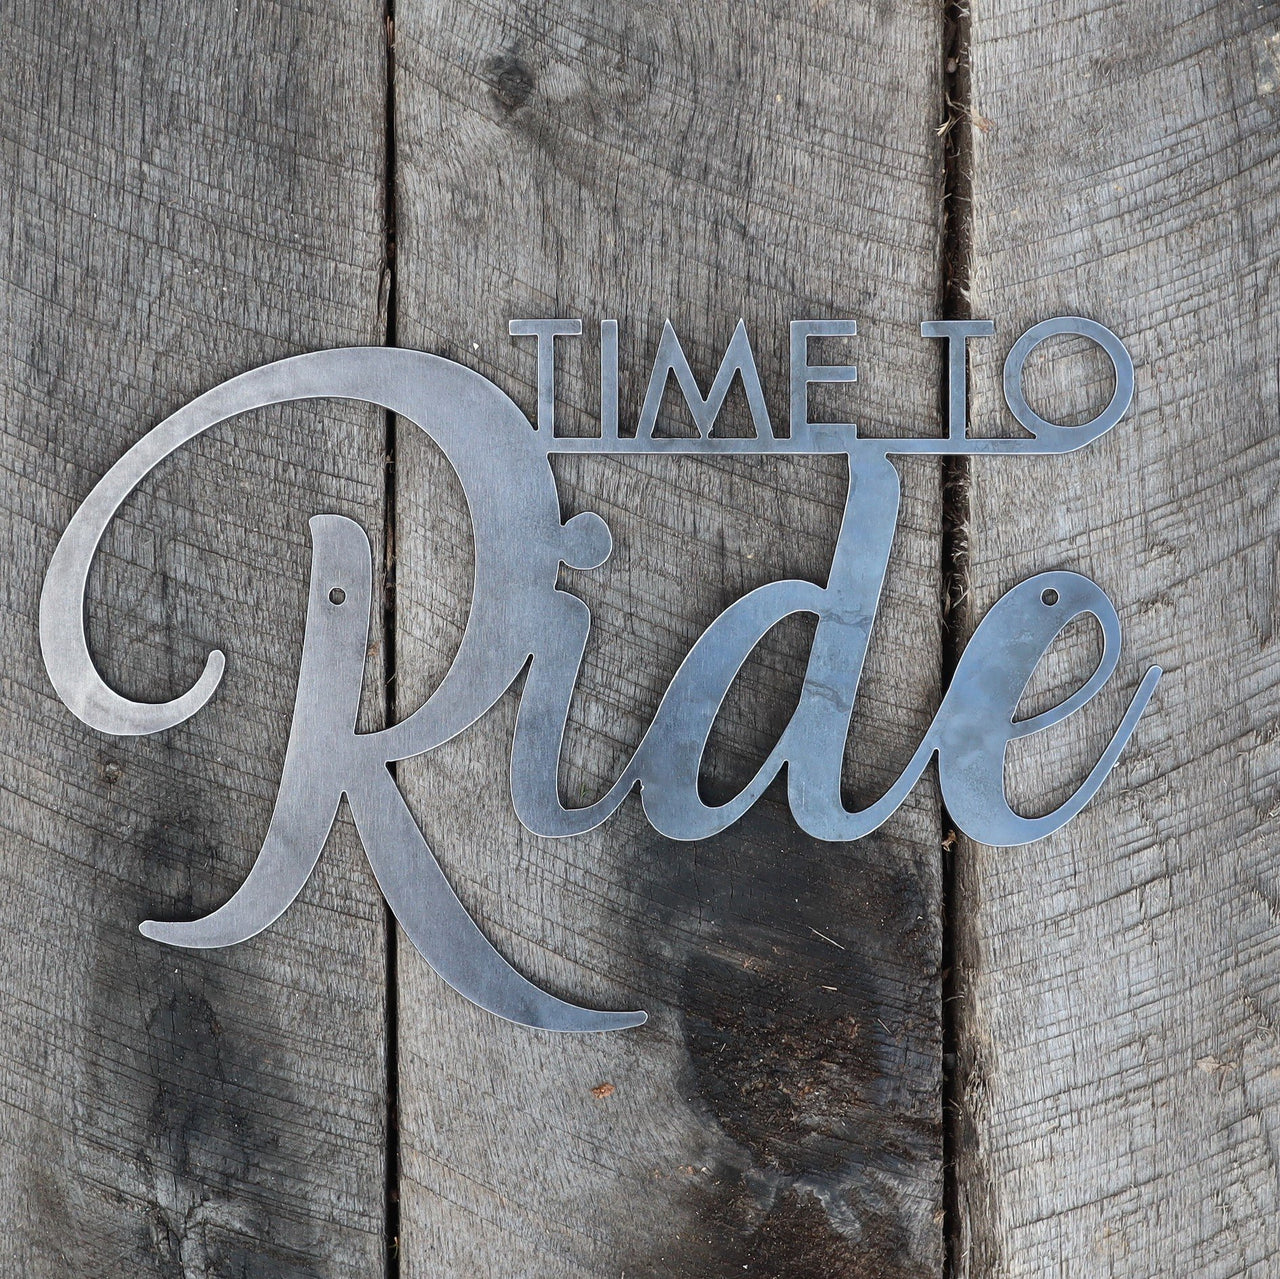 Time to Ride - Home Gym Sign - Work Out, Exercise, Biking Decor